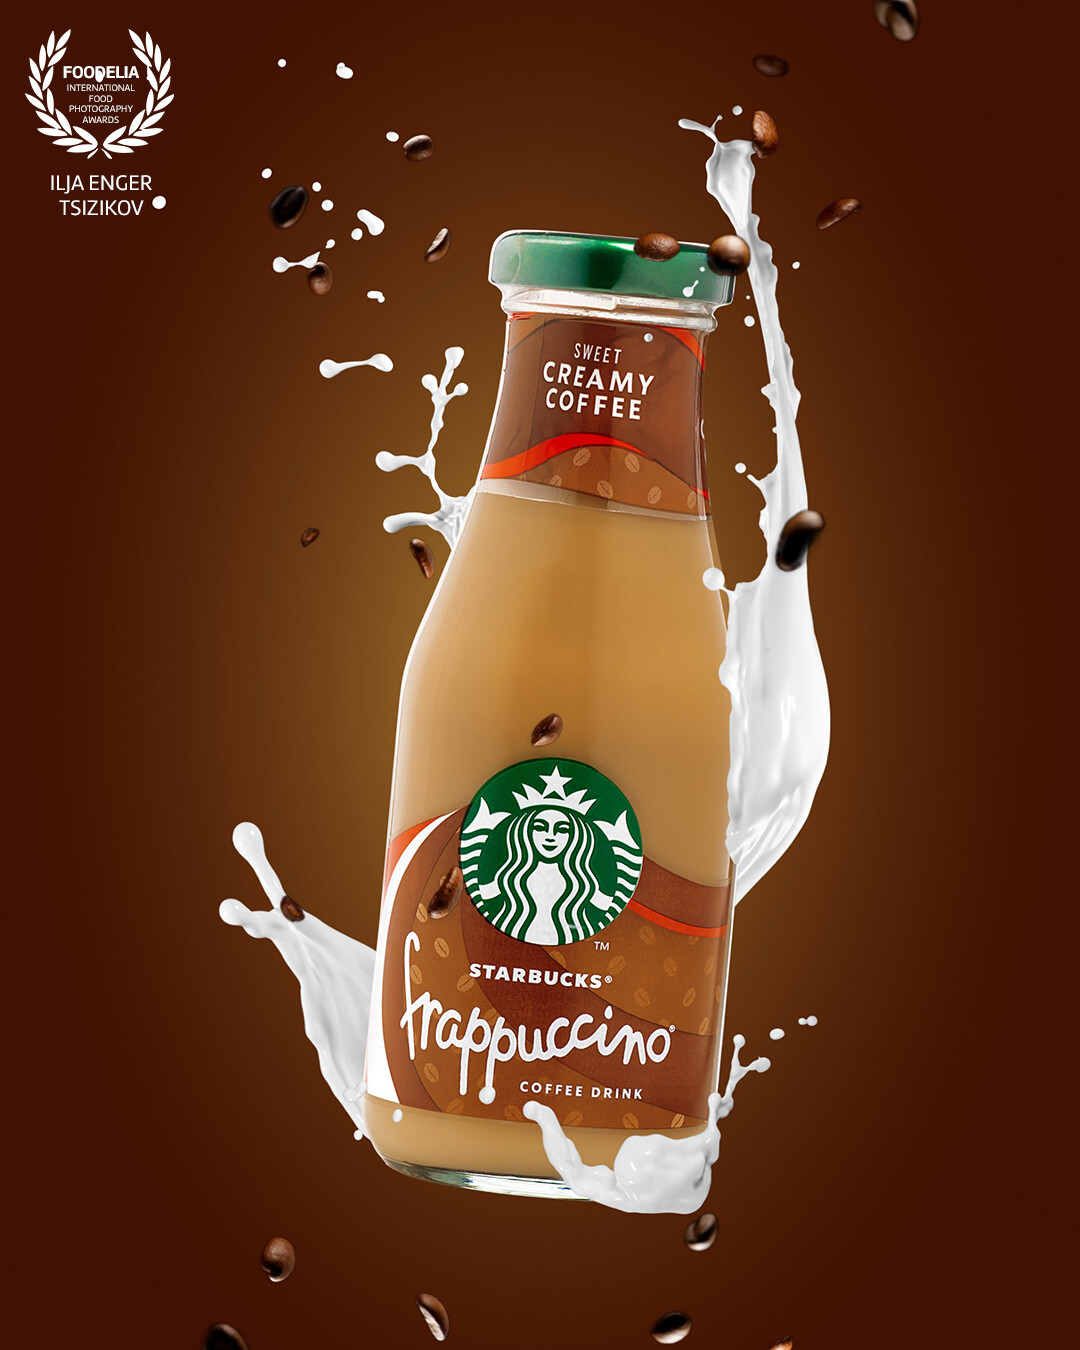 Frappuccino is a line of blended iced coffee drinks sold by Starbucks. It consists of coffee or crème base, blended with ice and ingredients such as flavored syrups and usually topped with whipped cream and or spices. Wikipedia<br />
Introduced: 1995; 28 years ago